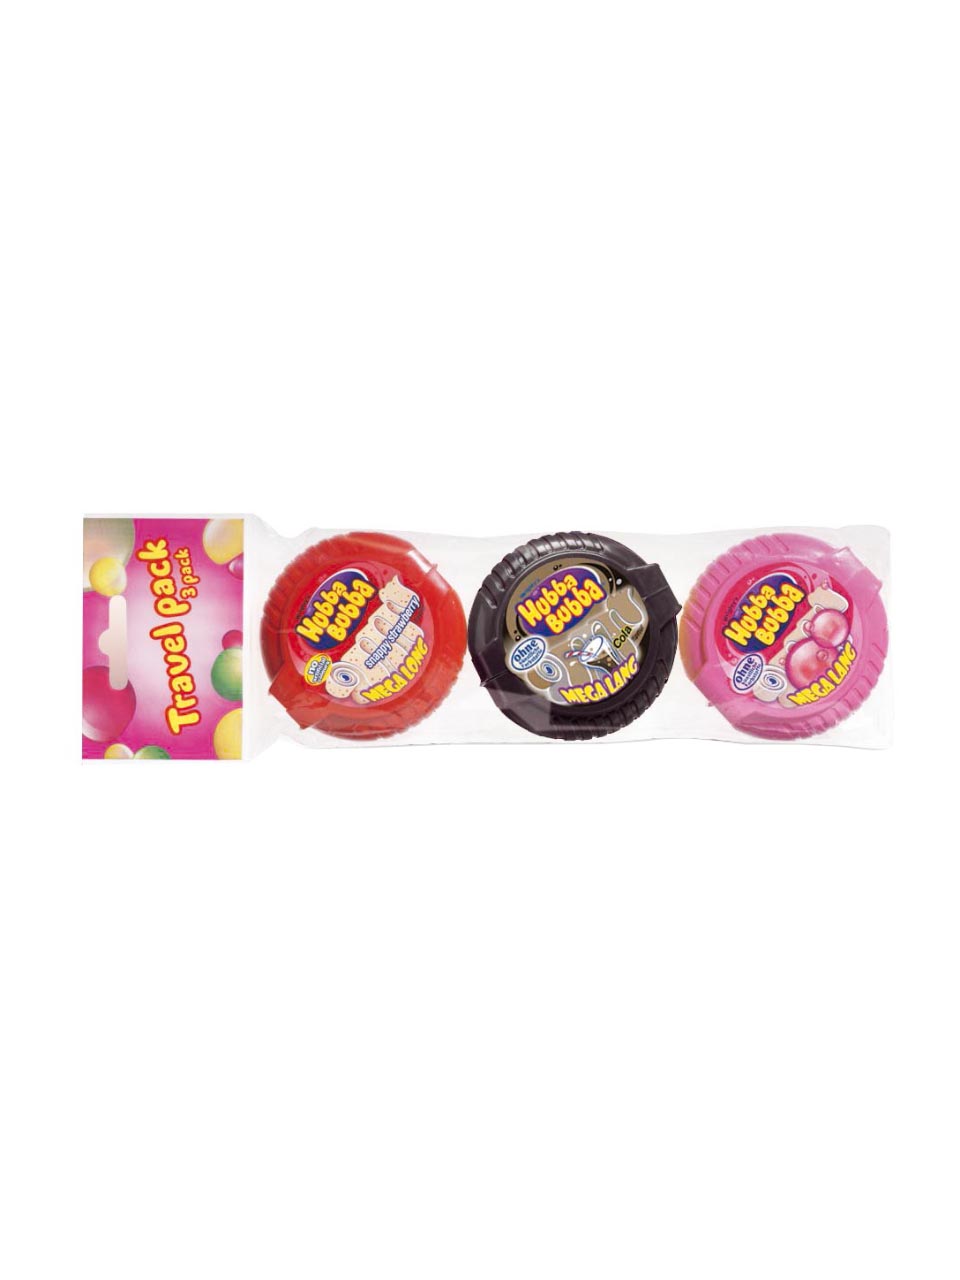 Tape multi-pack three flavor mix pack 3p168g null - onesize - 1